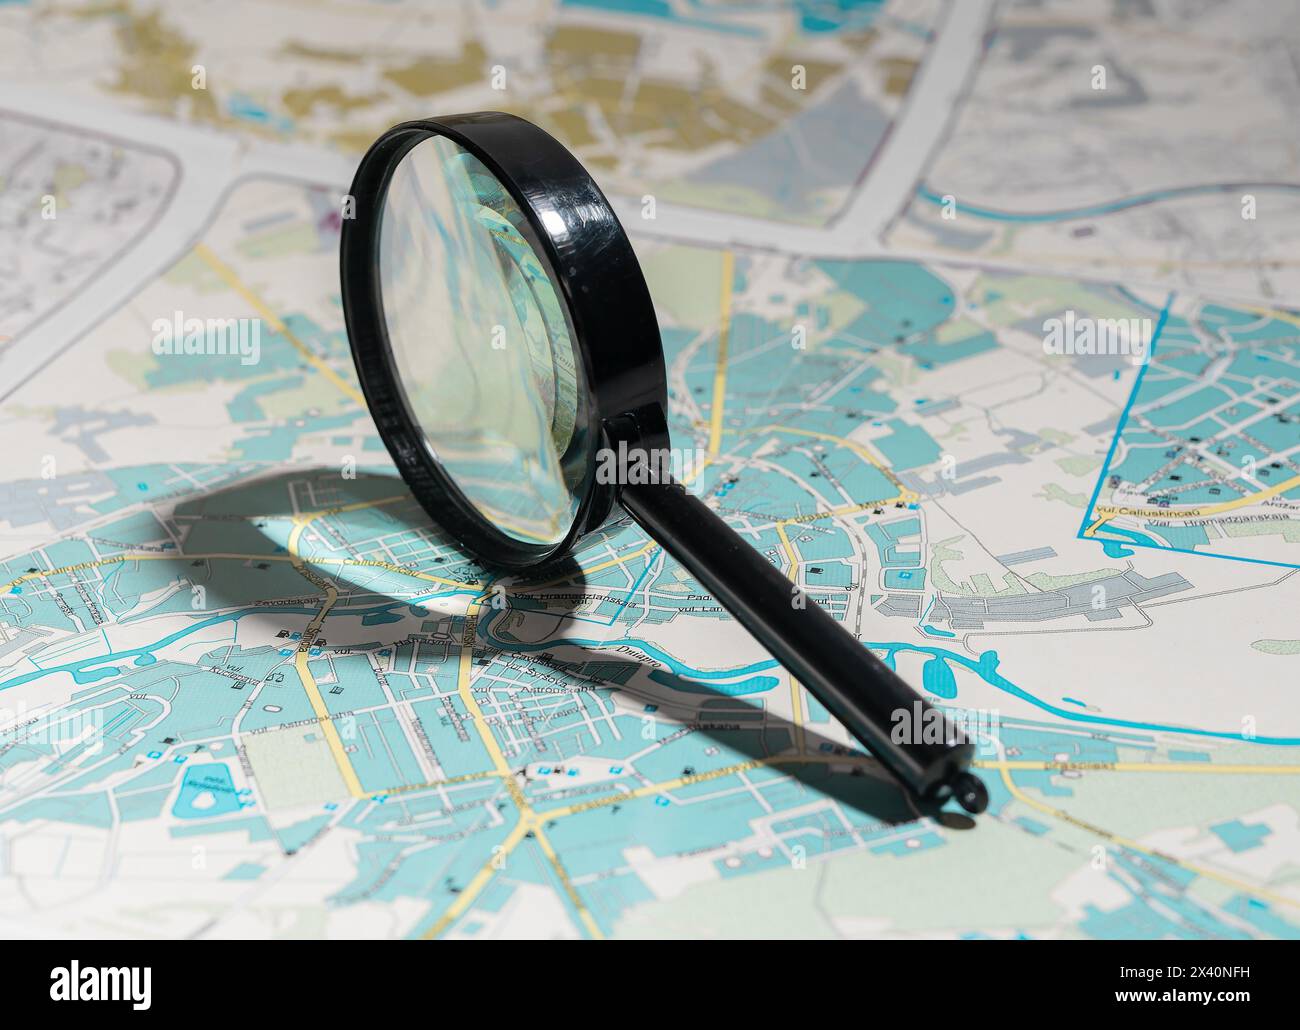 Travel guide map, global journey planning. World trip concept, exploring destinations, directions. Business and leisure tourism, country and city disc Stock Photo